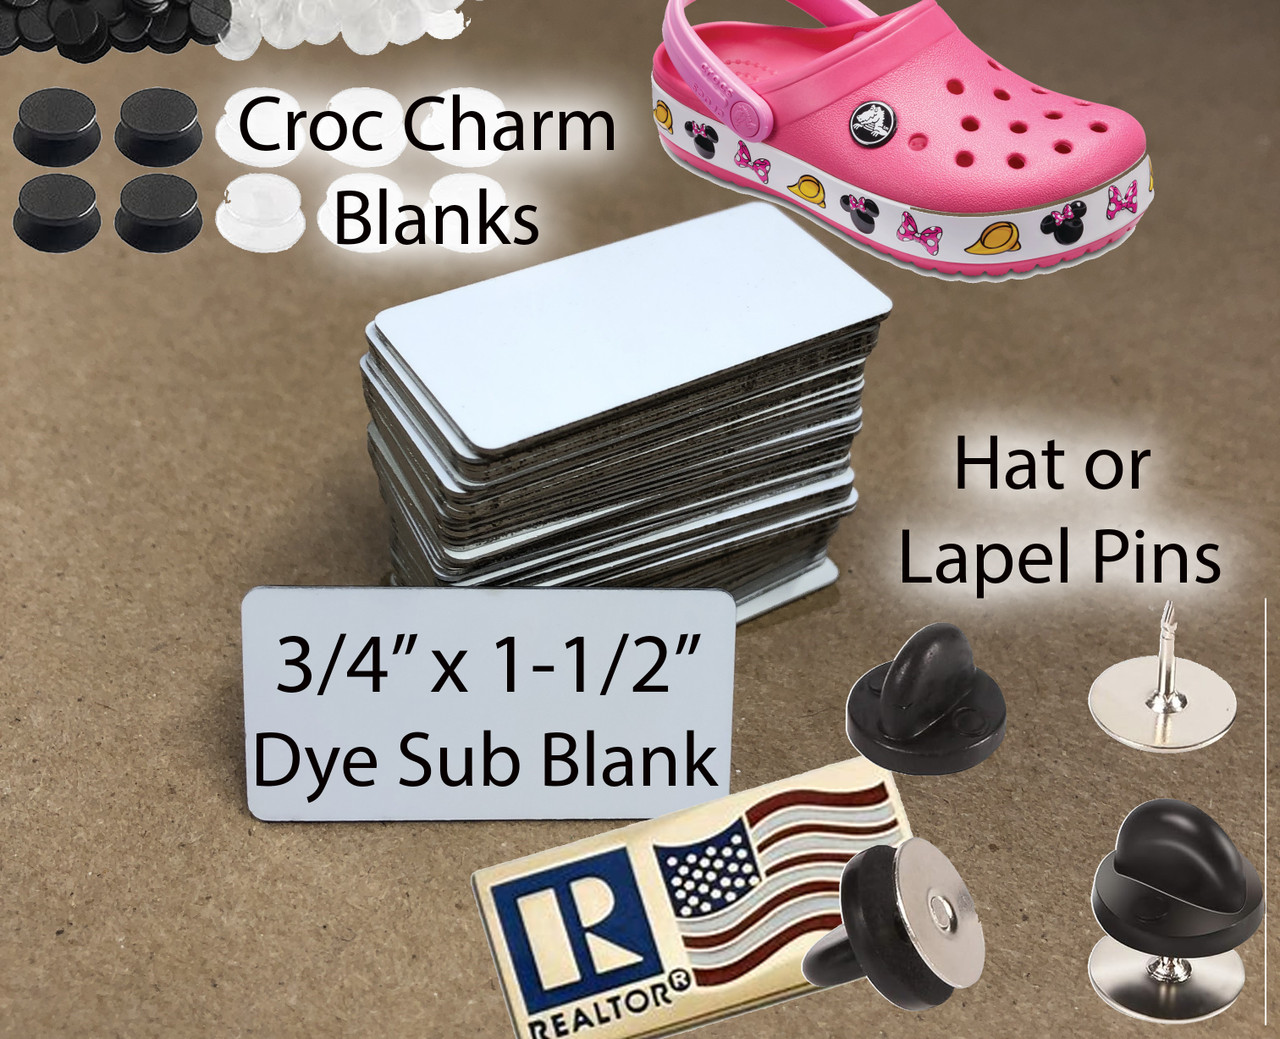 Hat Pin, Lapel Pin or Croc Charm Sublimation Blanks 3/4 x 1-1/2 $0.35ea,  Lot of 100